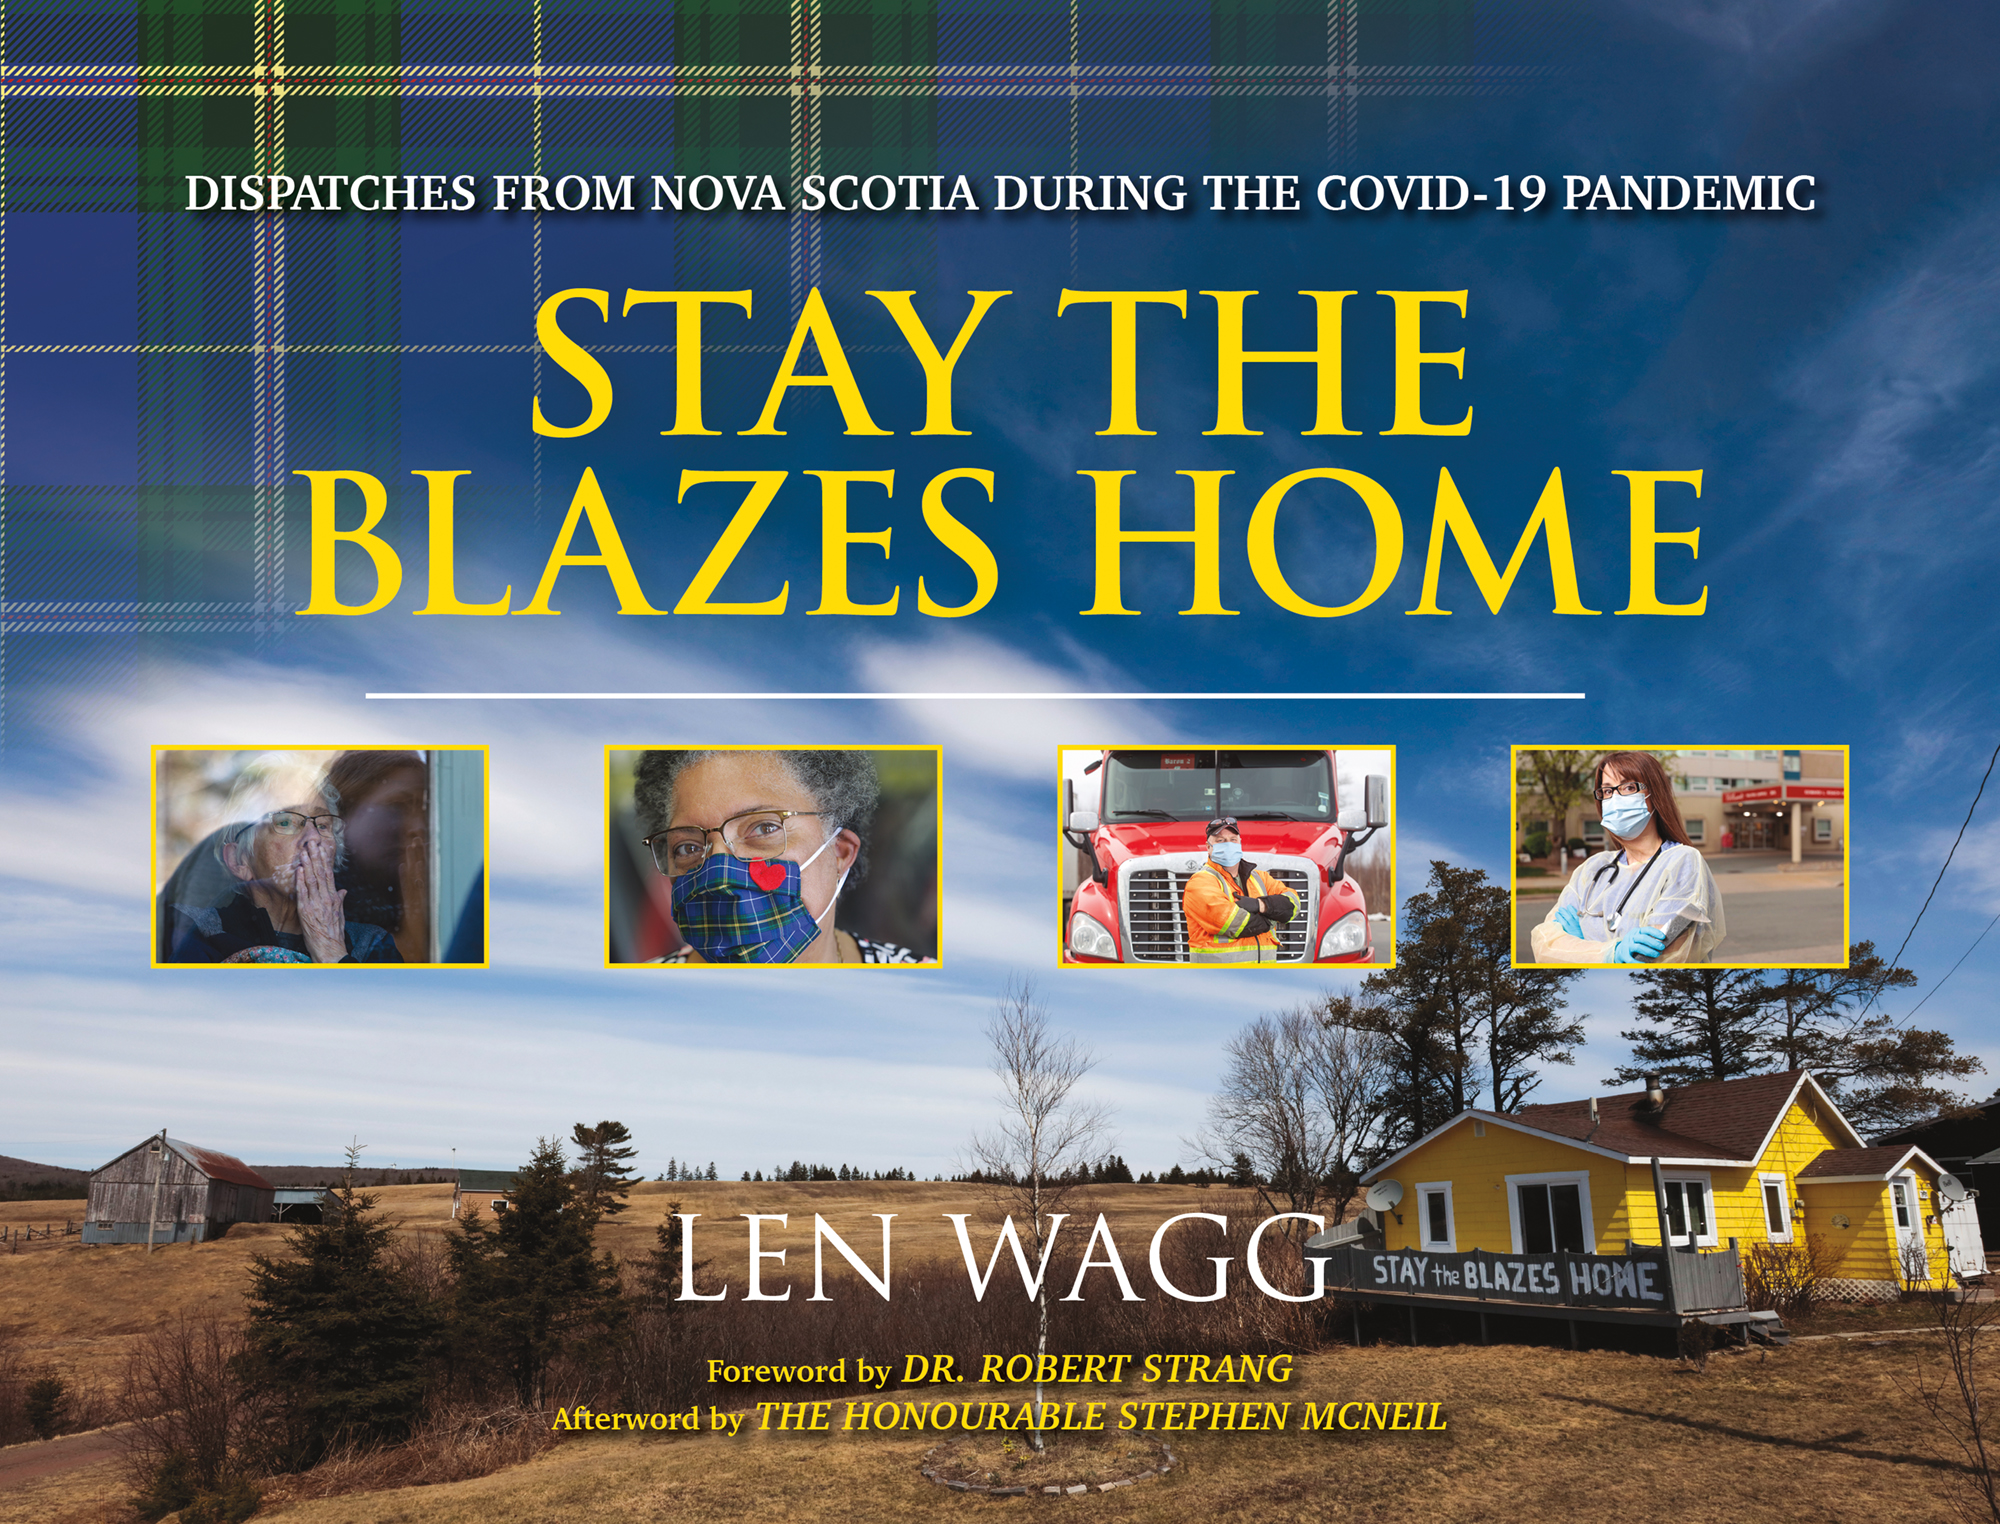 Stay the Blazes Home